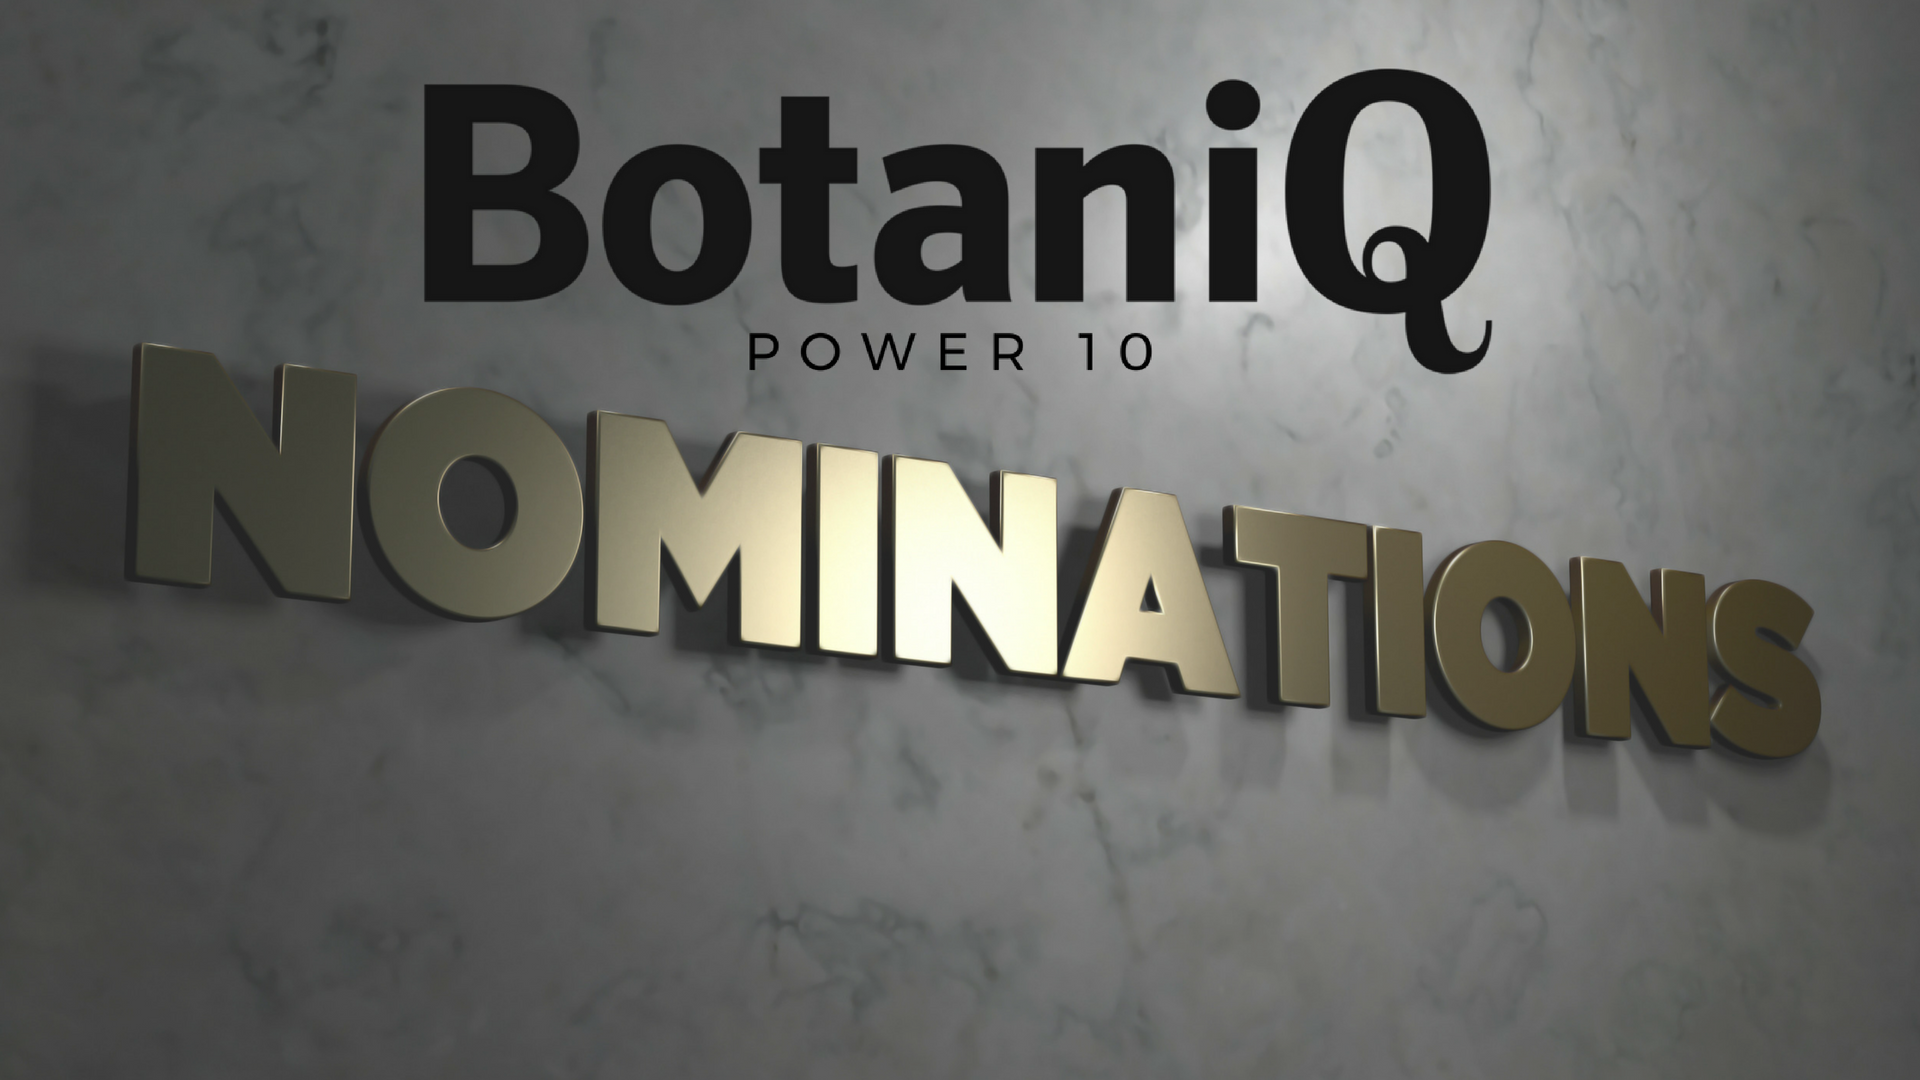 BotaniQ Power 10 Logo with Nominations in gold letters underneath